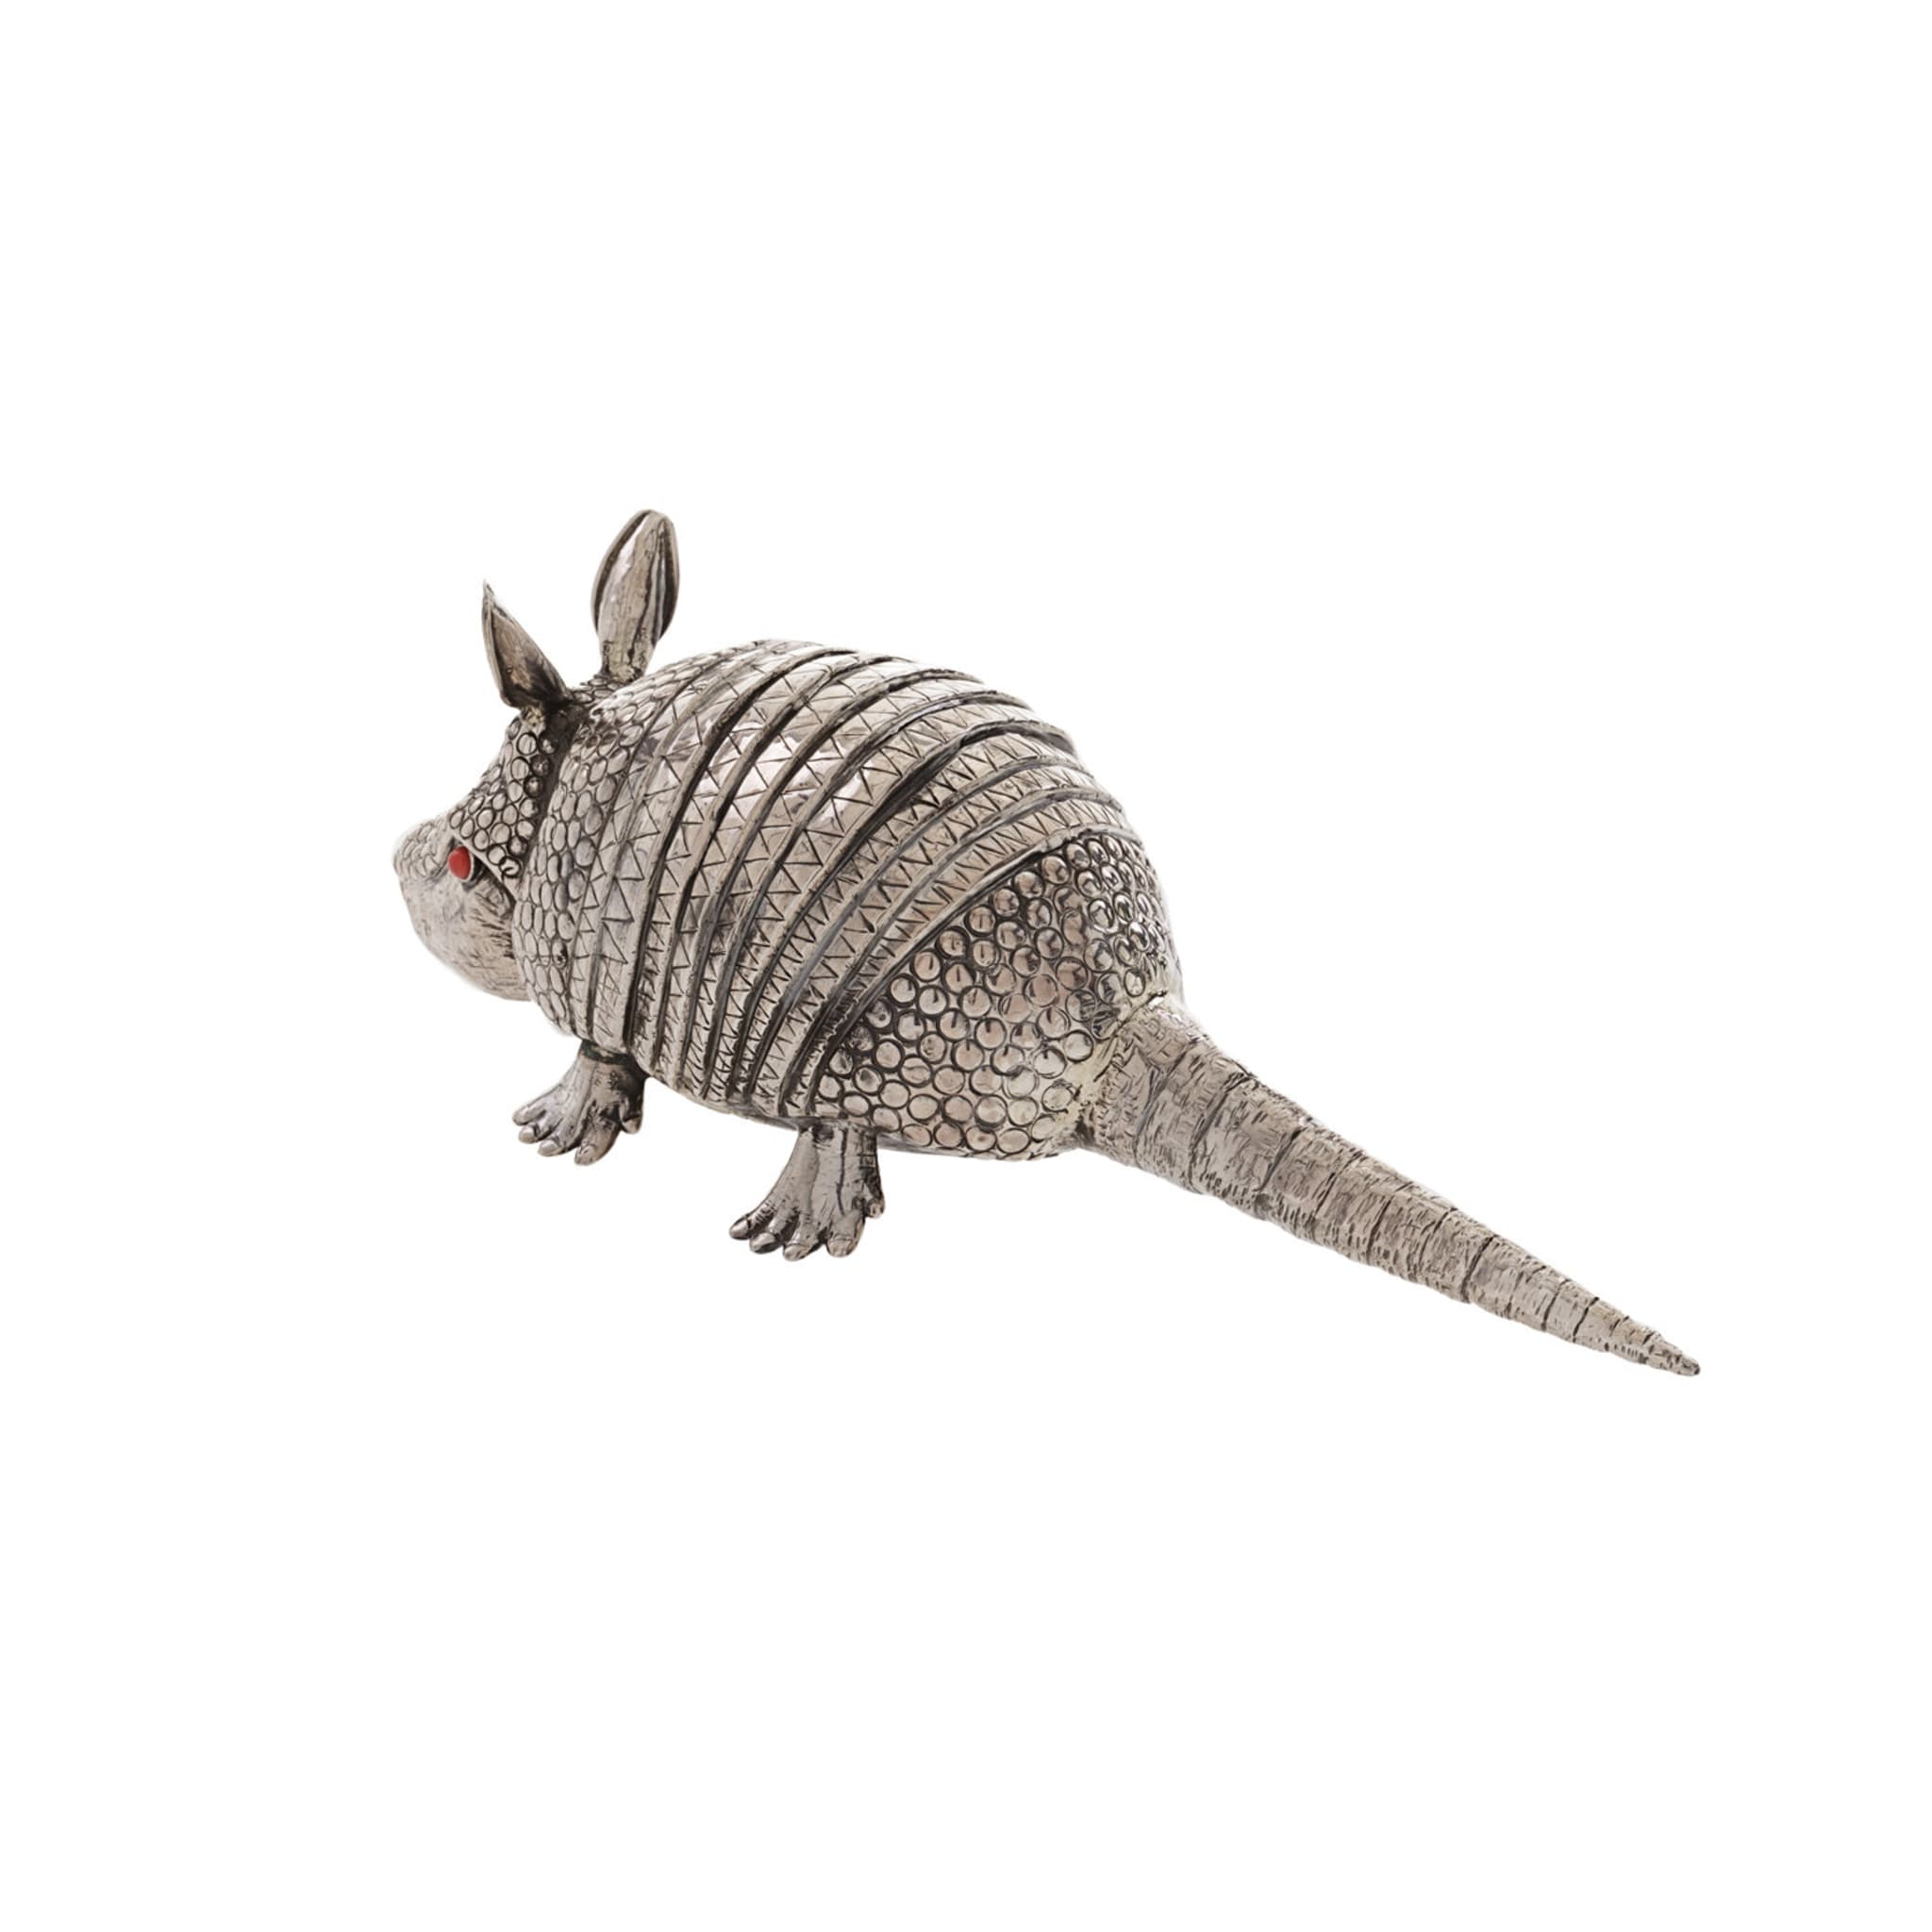 The Armadillo Sterling Silver Lighter - Alternative view 1